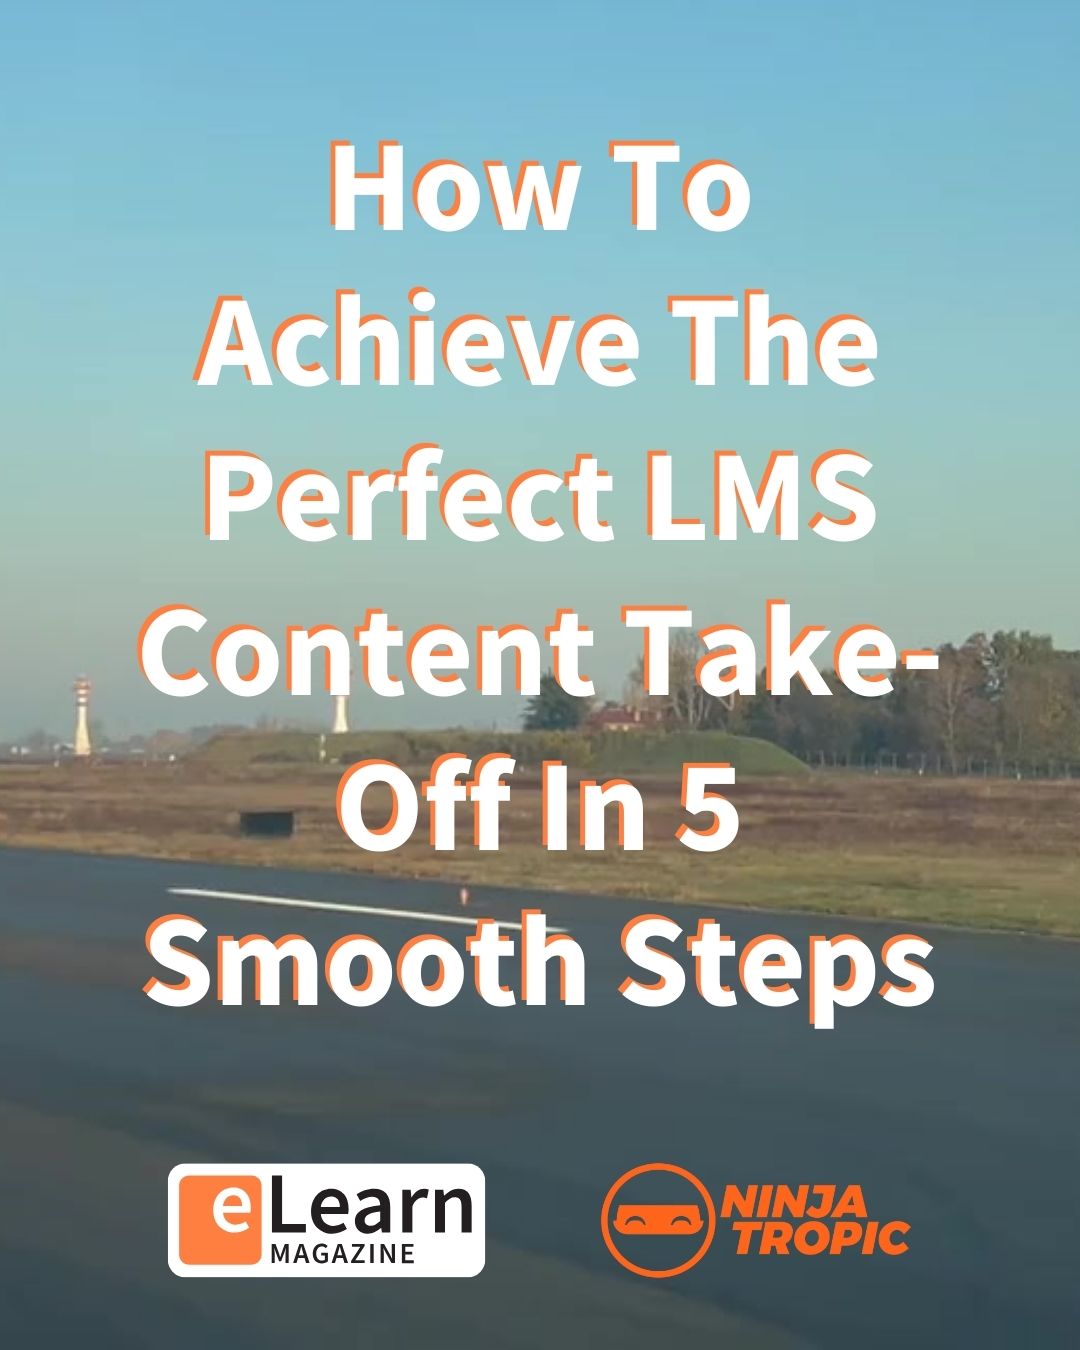 How To Achieve The Perfect LMS Content Take-Off In 5 Smooth Steps